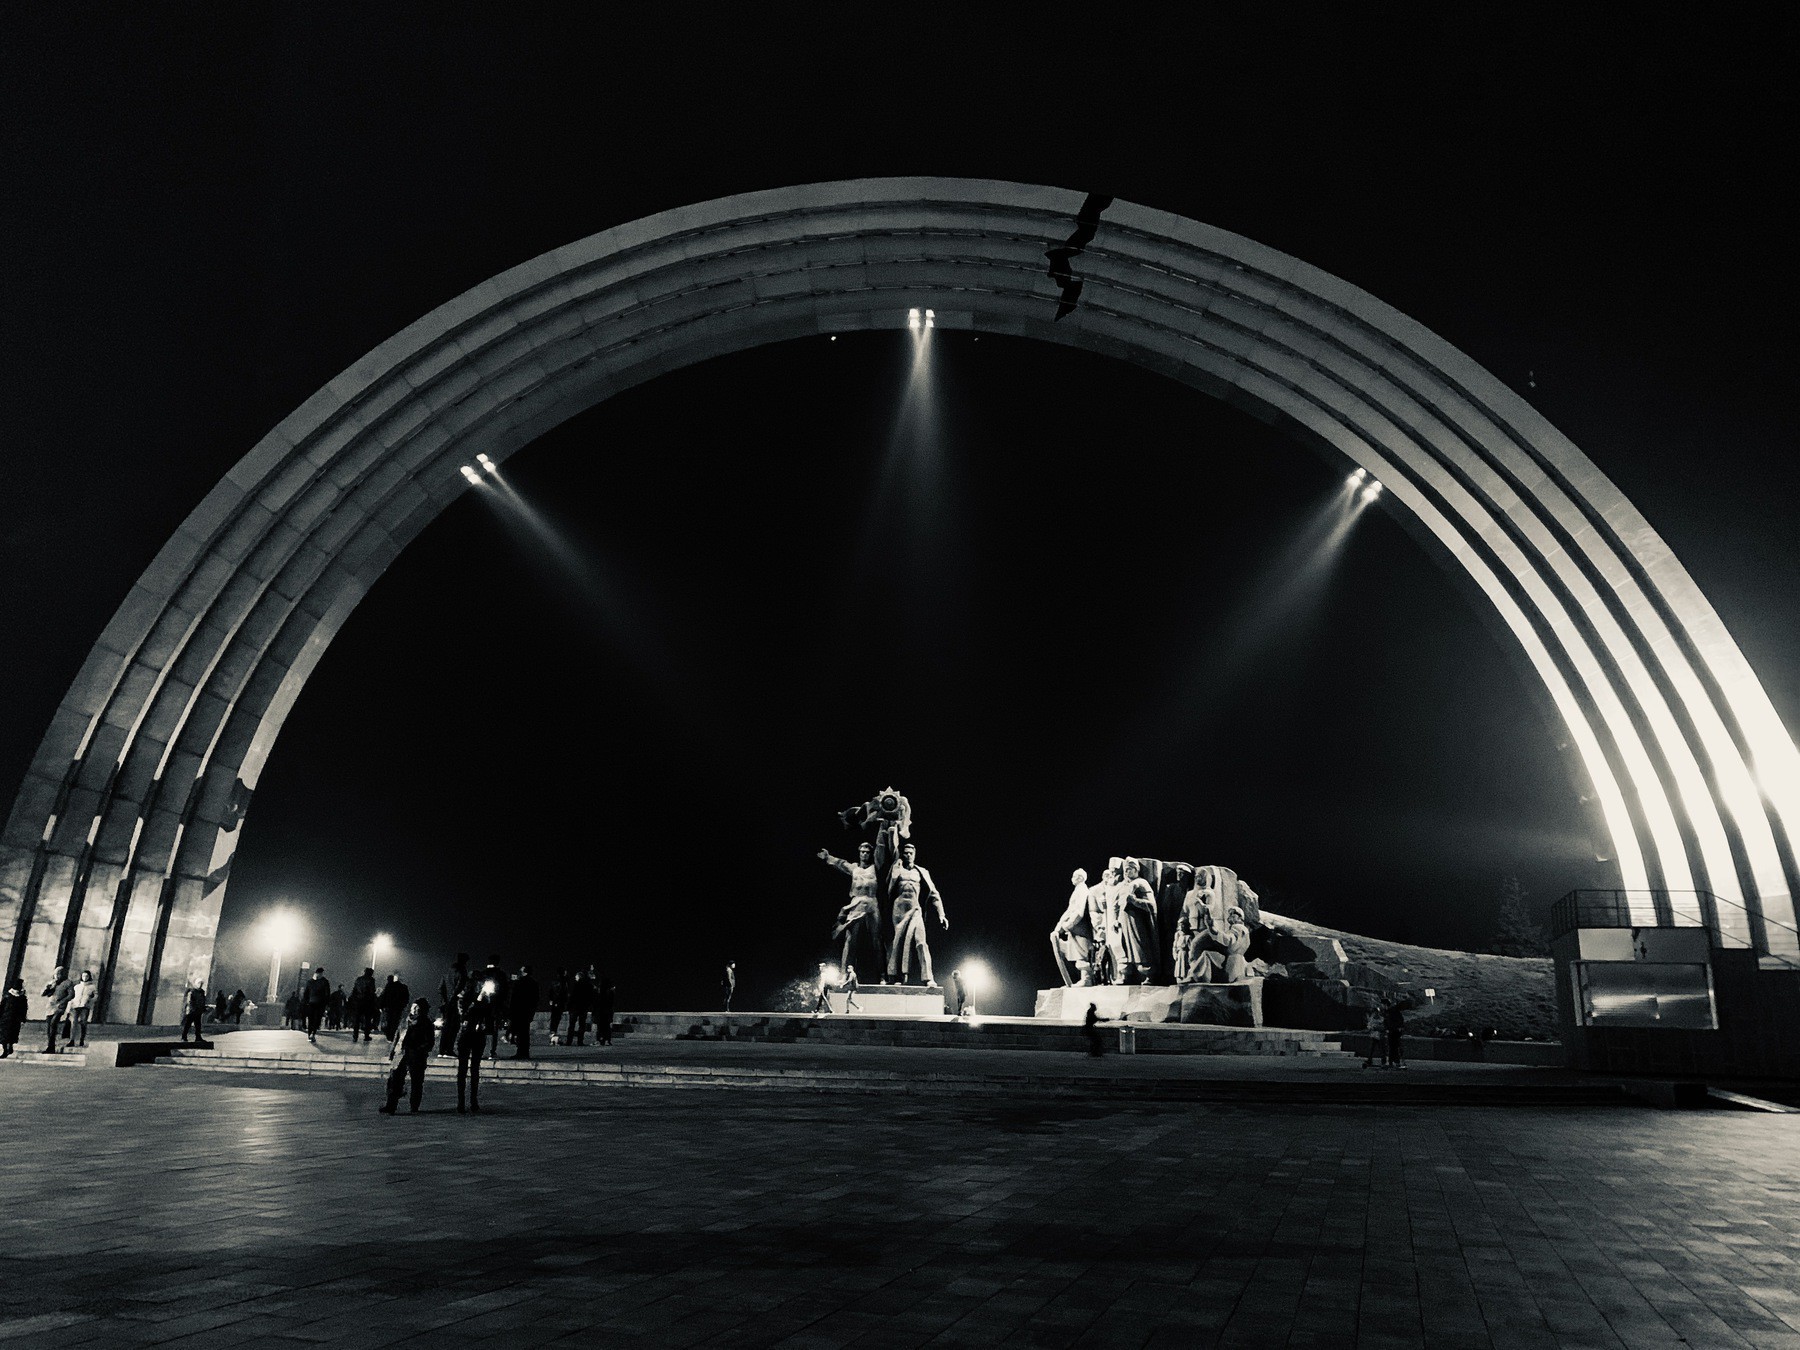 People’s Friendship Arch